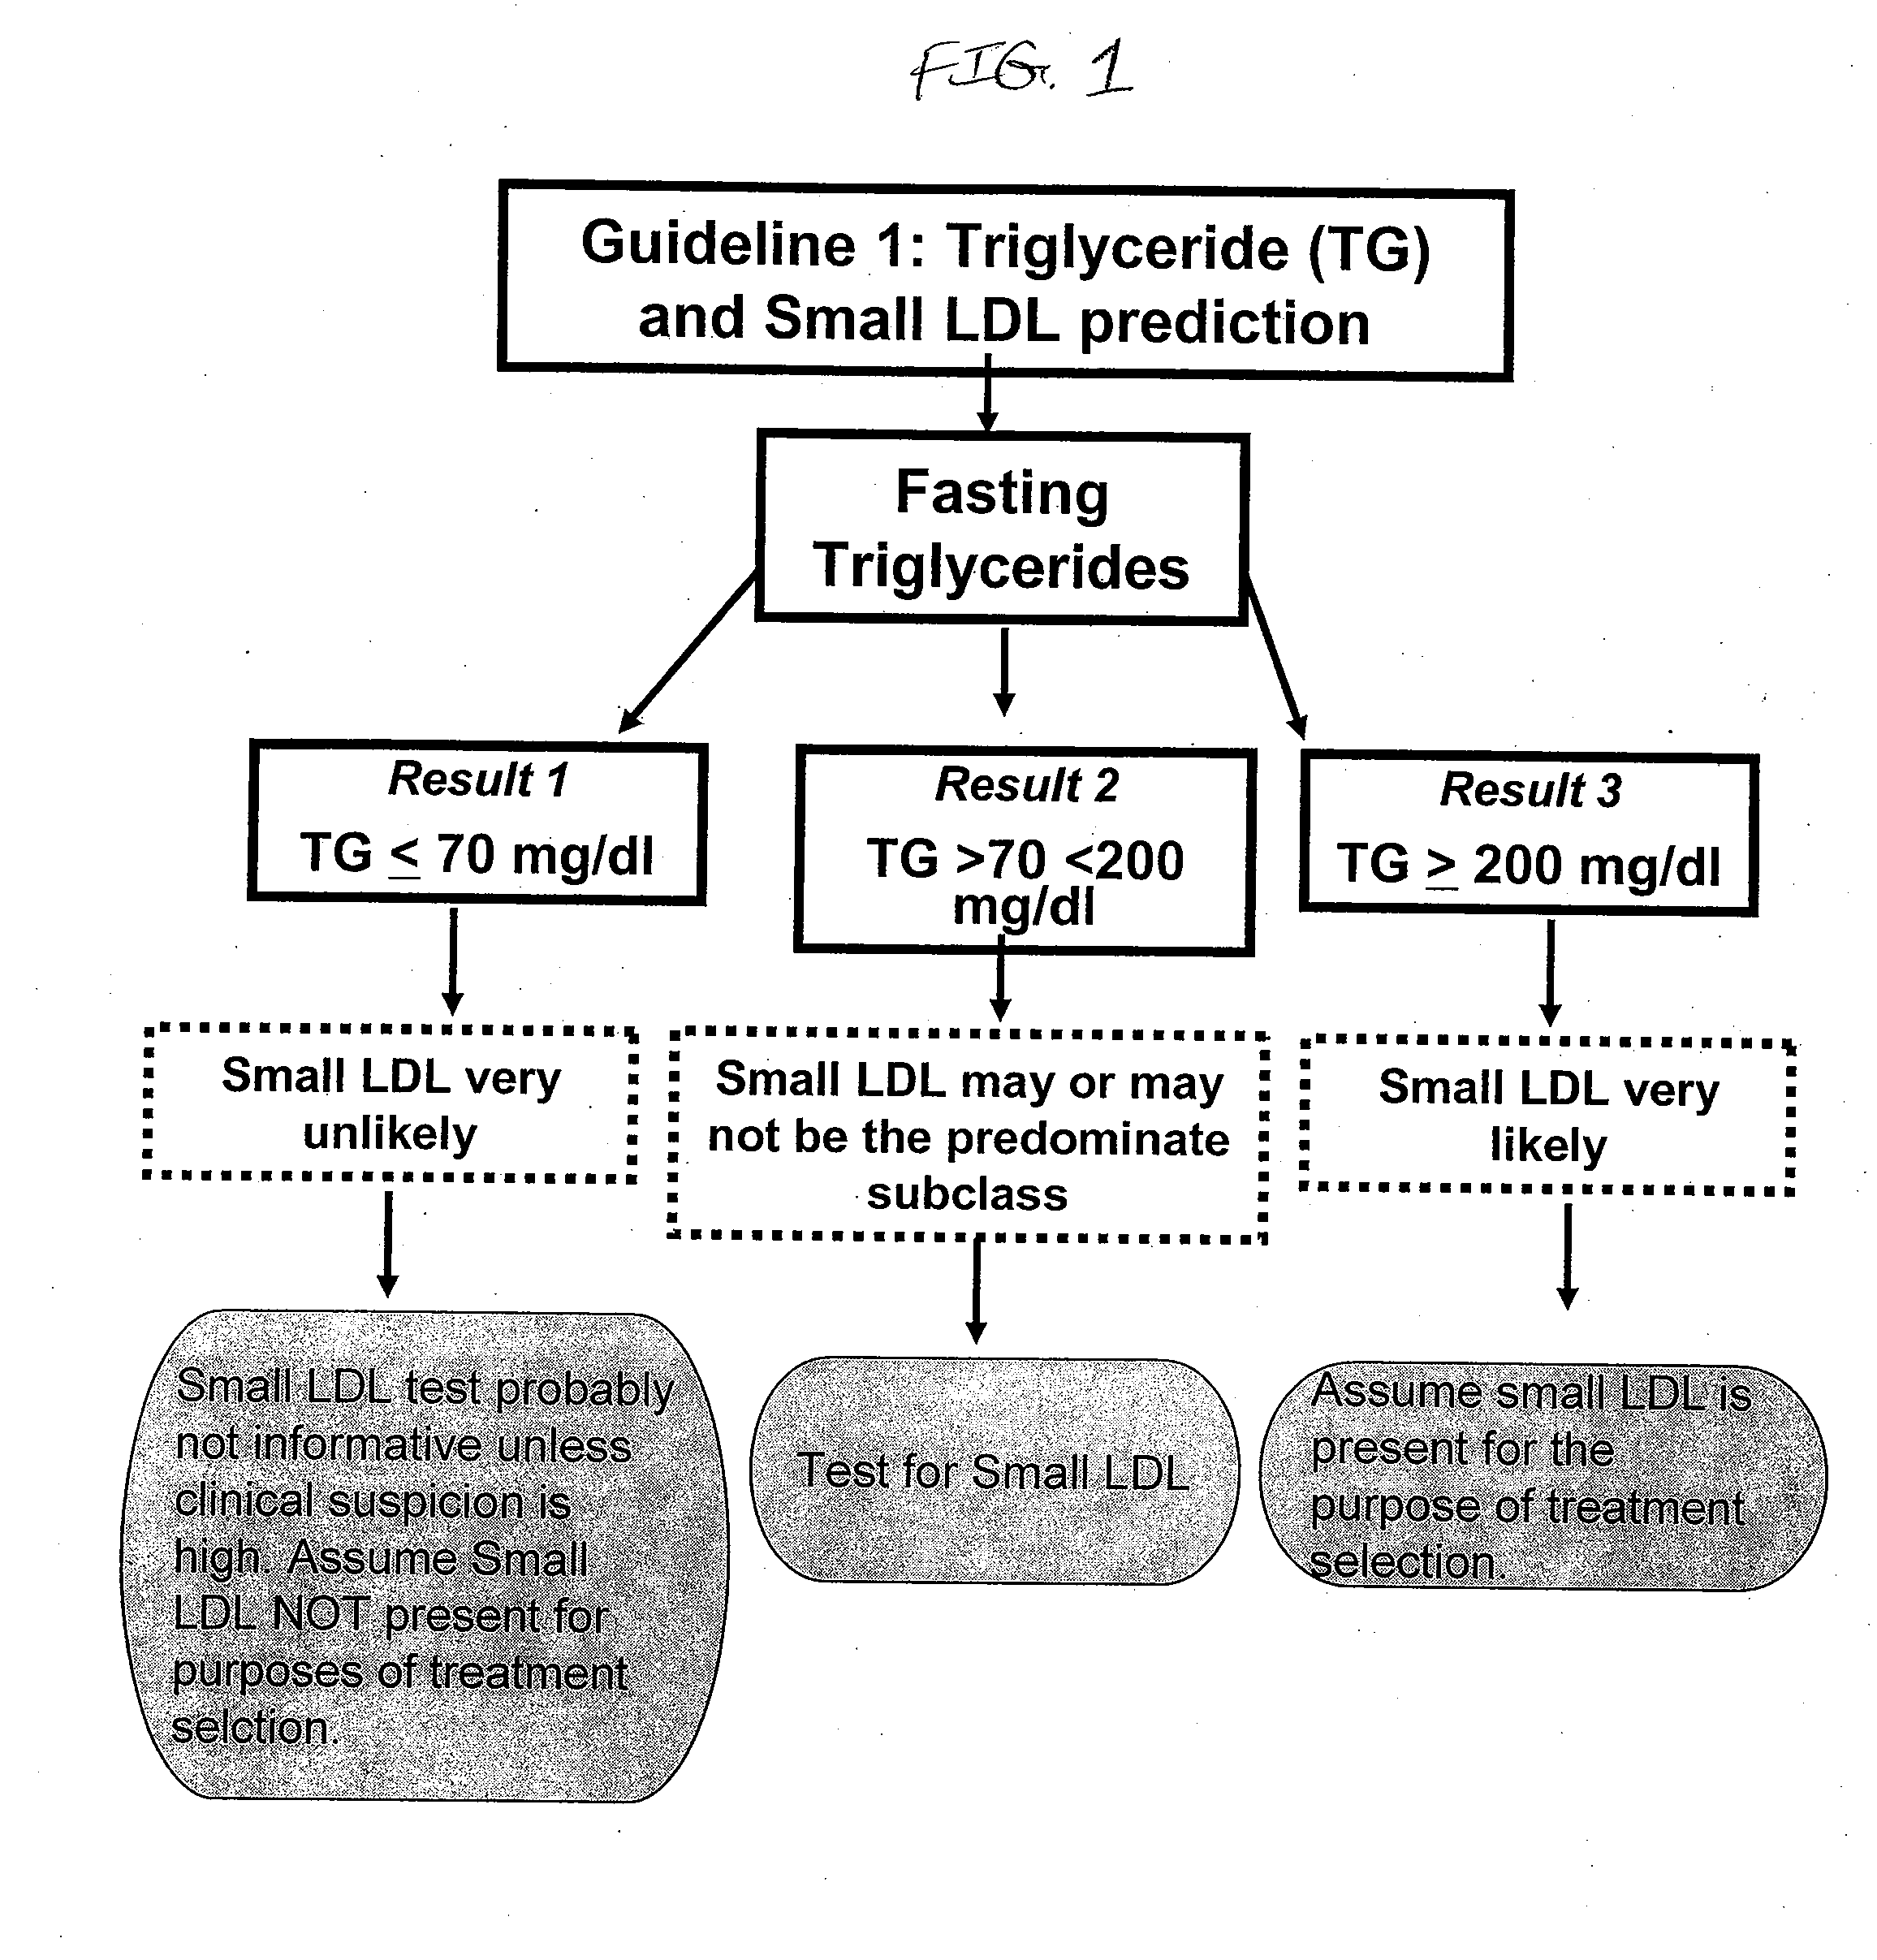 System and method for diagnosing and managing those at risk for cardiovascular disease